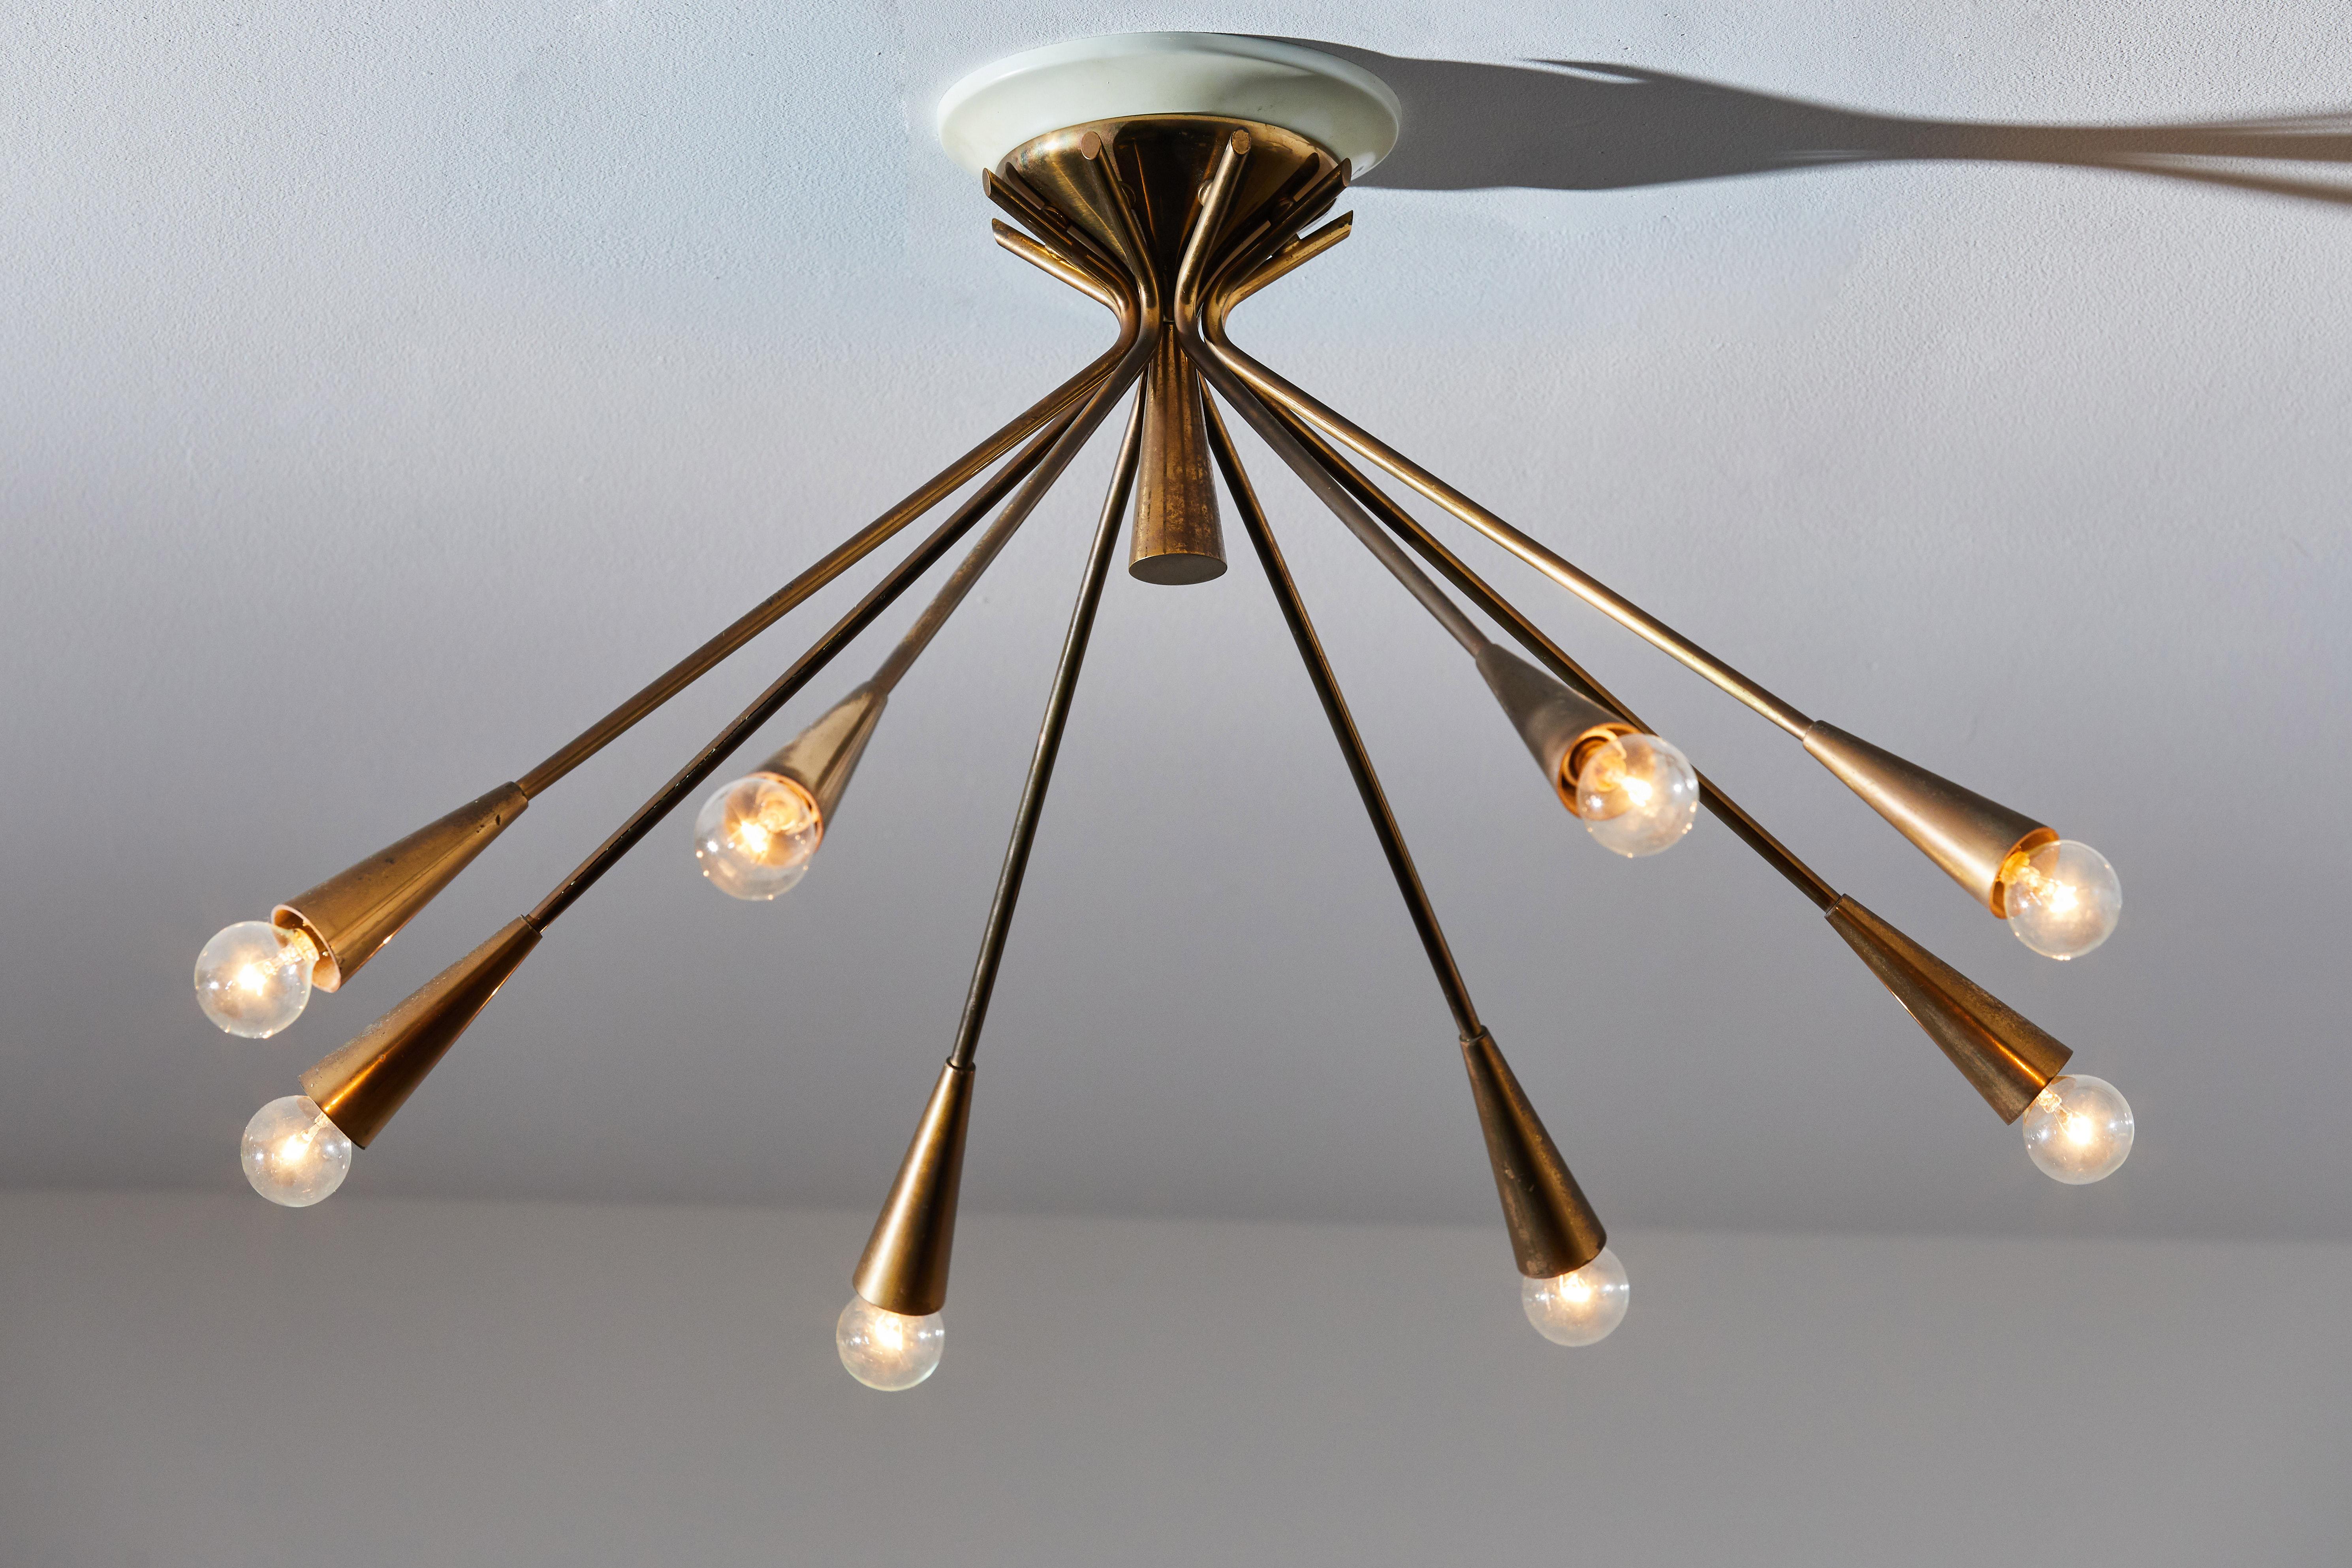 Flush mount ceiling light by Oscar Torlasco for Lumi. Designed and manufactured in Italy, circa 1950s. Brass, enameled metal. Rewired for U.S. junction boxes. Retains original manufacturer's label. Takes eight E27 European candelabra 25w maximum